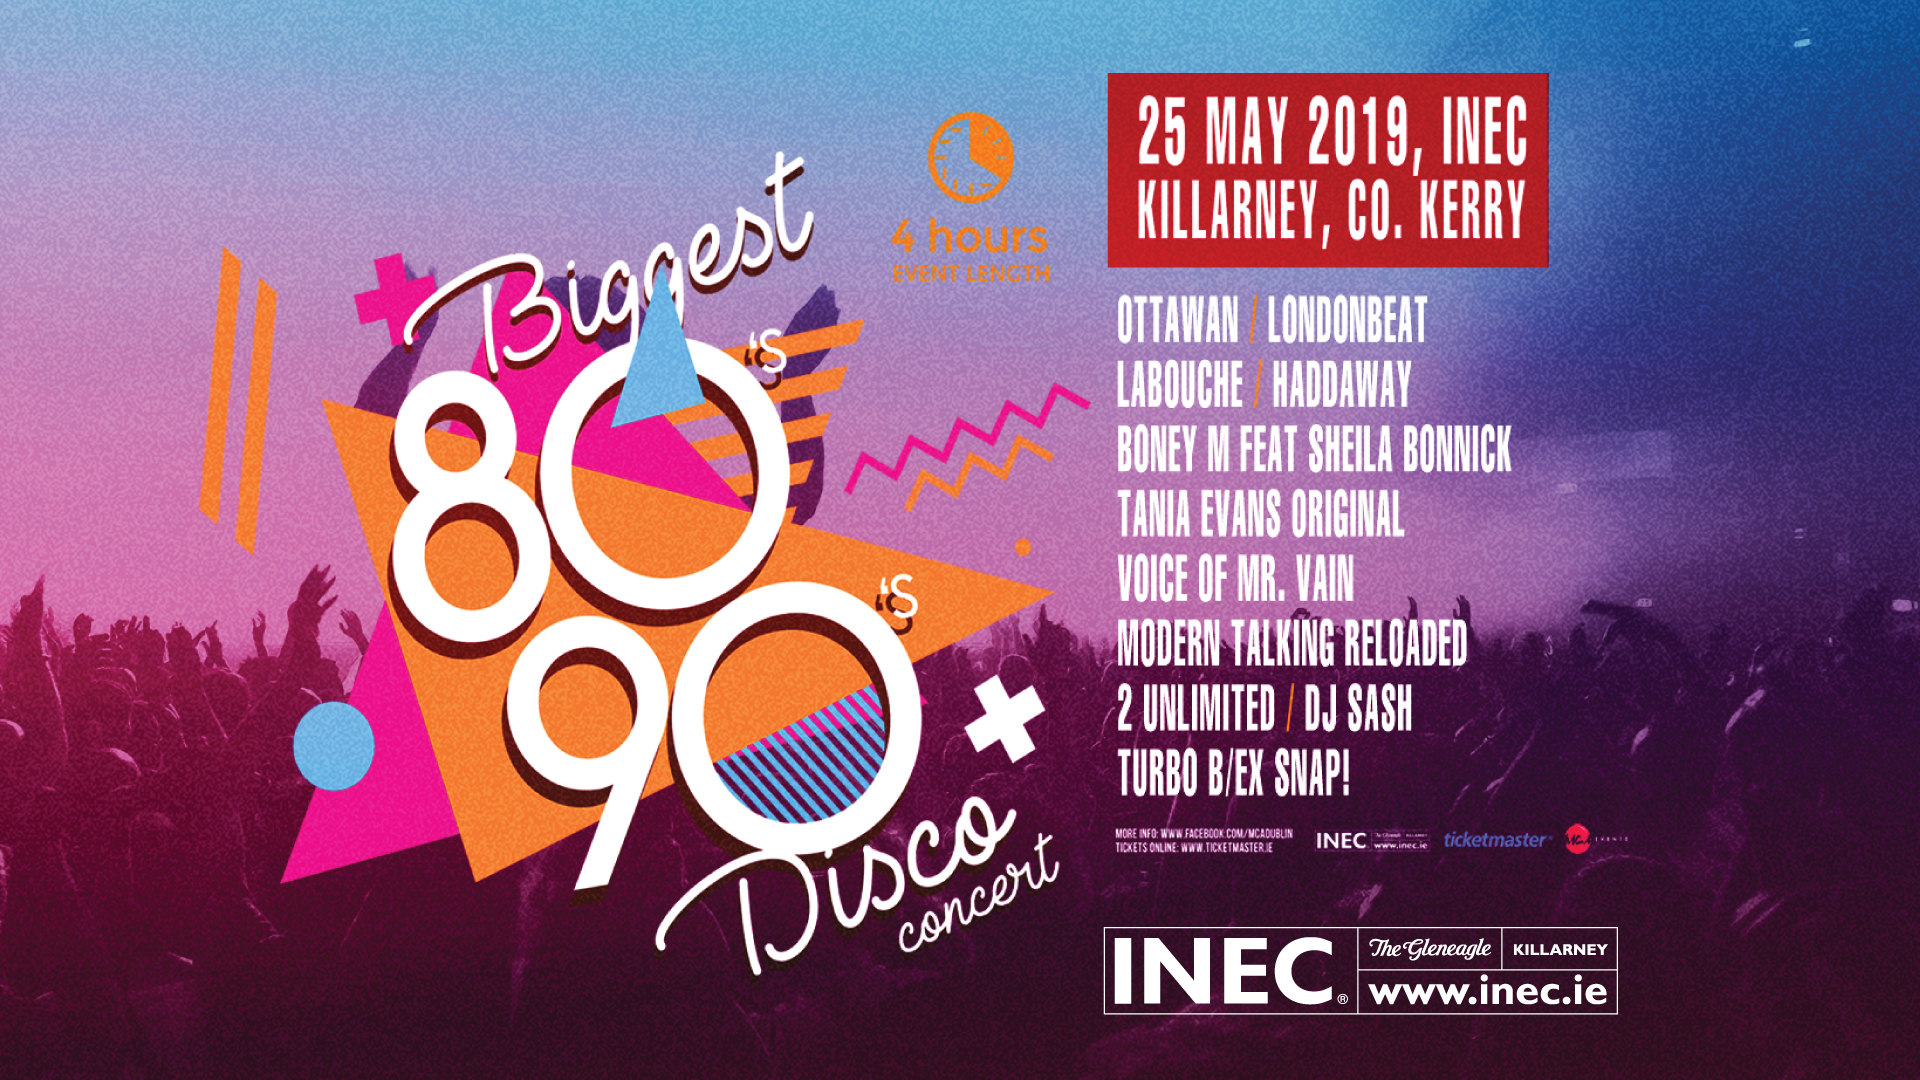 Biggest 80's & 90's Disco and Concert comes to the INEC Killarney May 25th 2019